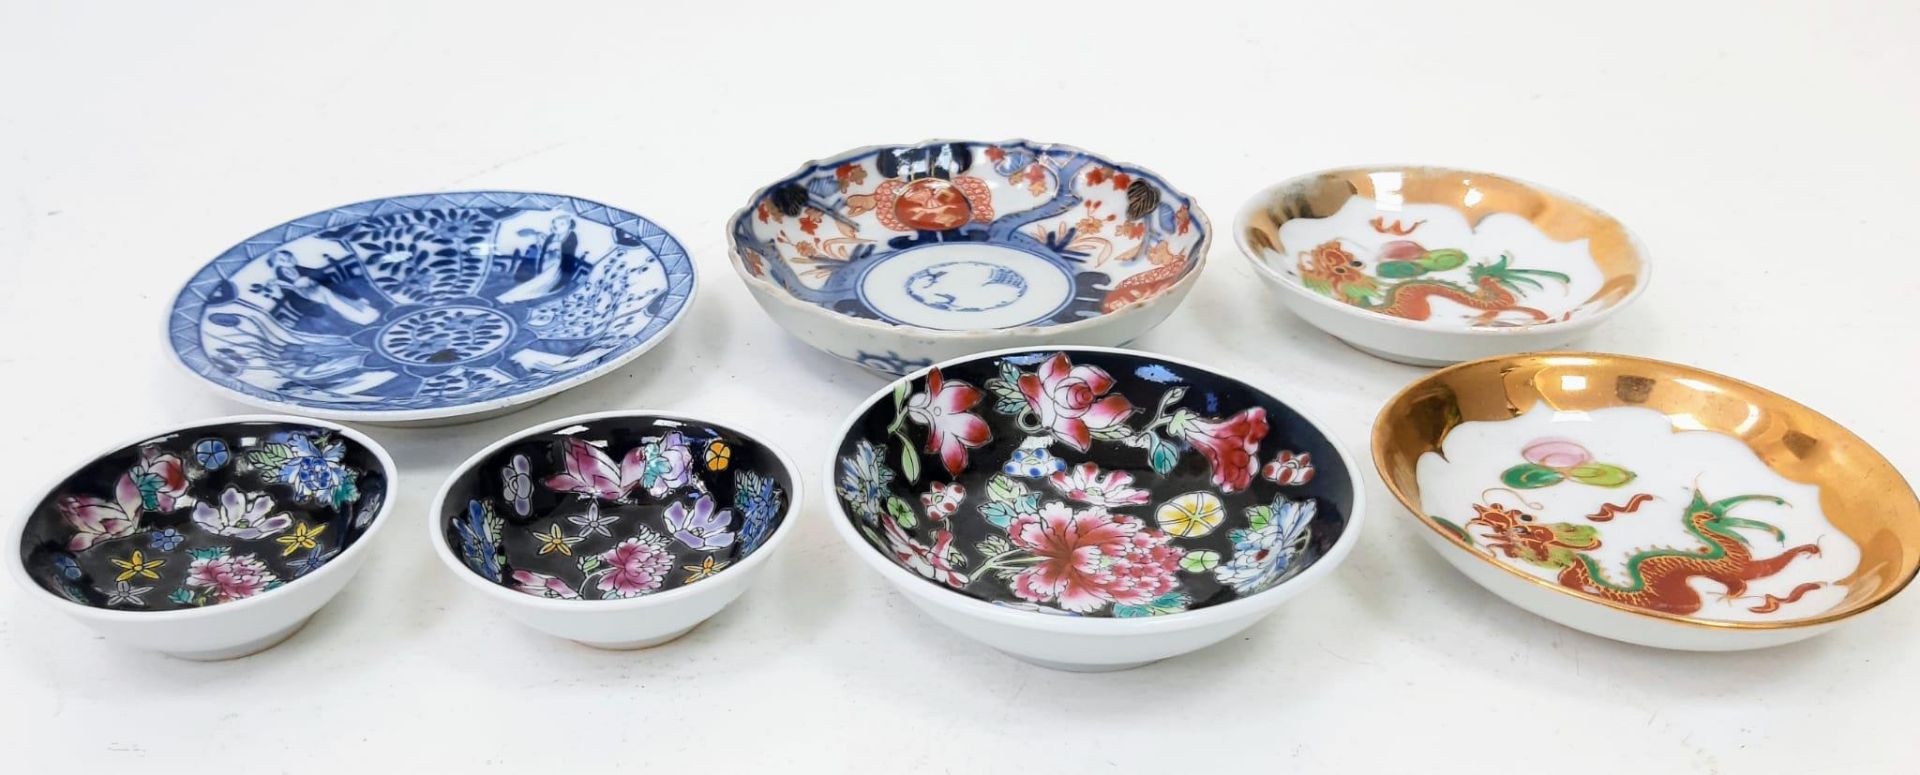 A Selection of Seven Mid-19th Century Chinese Sauce Bowls/Dishes.